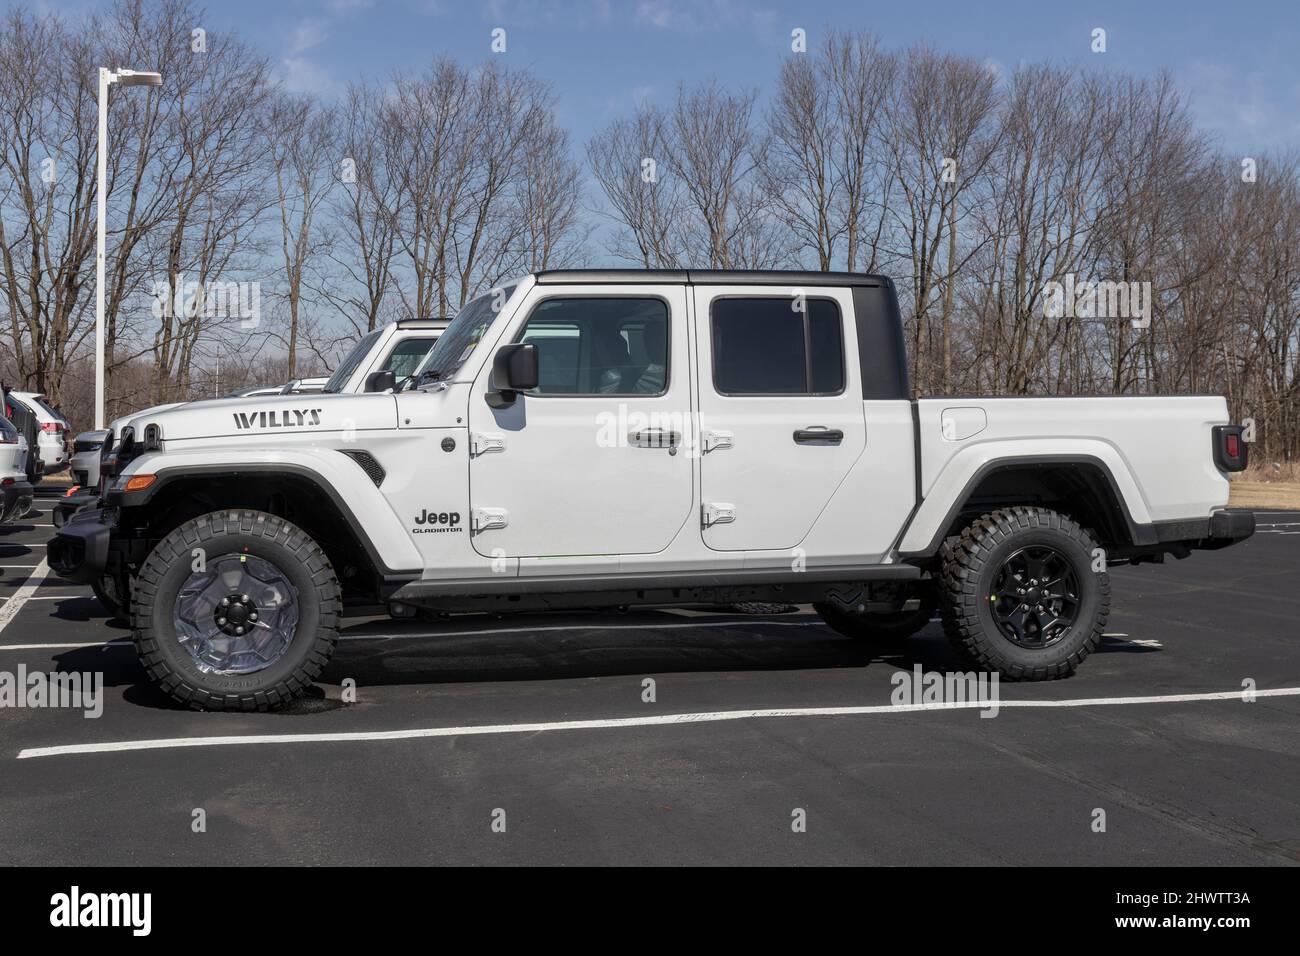 Kokomo - Circa March 2022: Jeep Gladiator display at a Stellantis dealer. The Jeep Gladiator models include the Sport, Willys, Rubicon and Mojave. Stock Photo